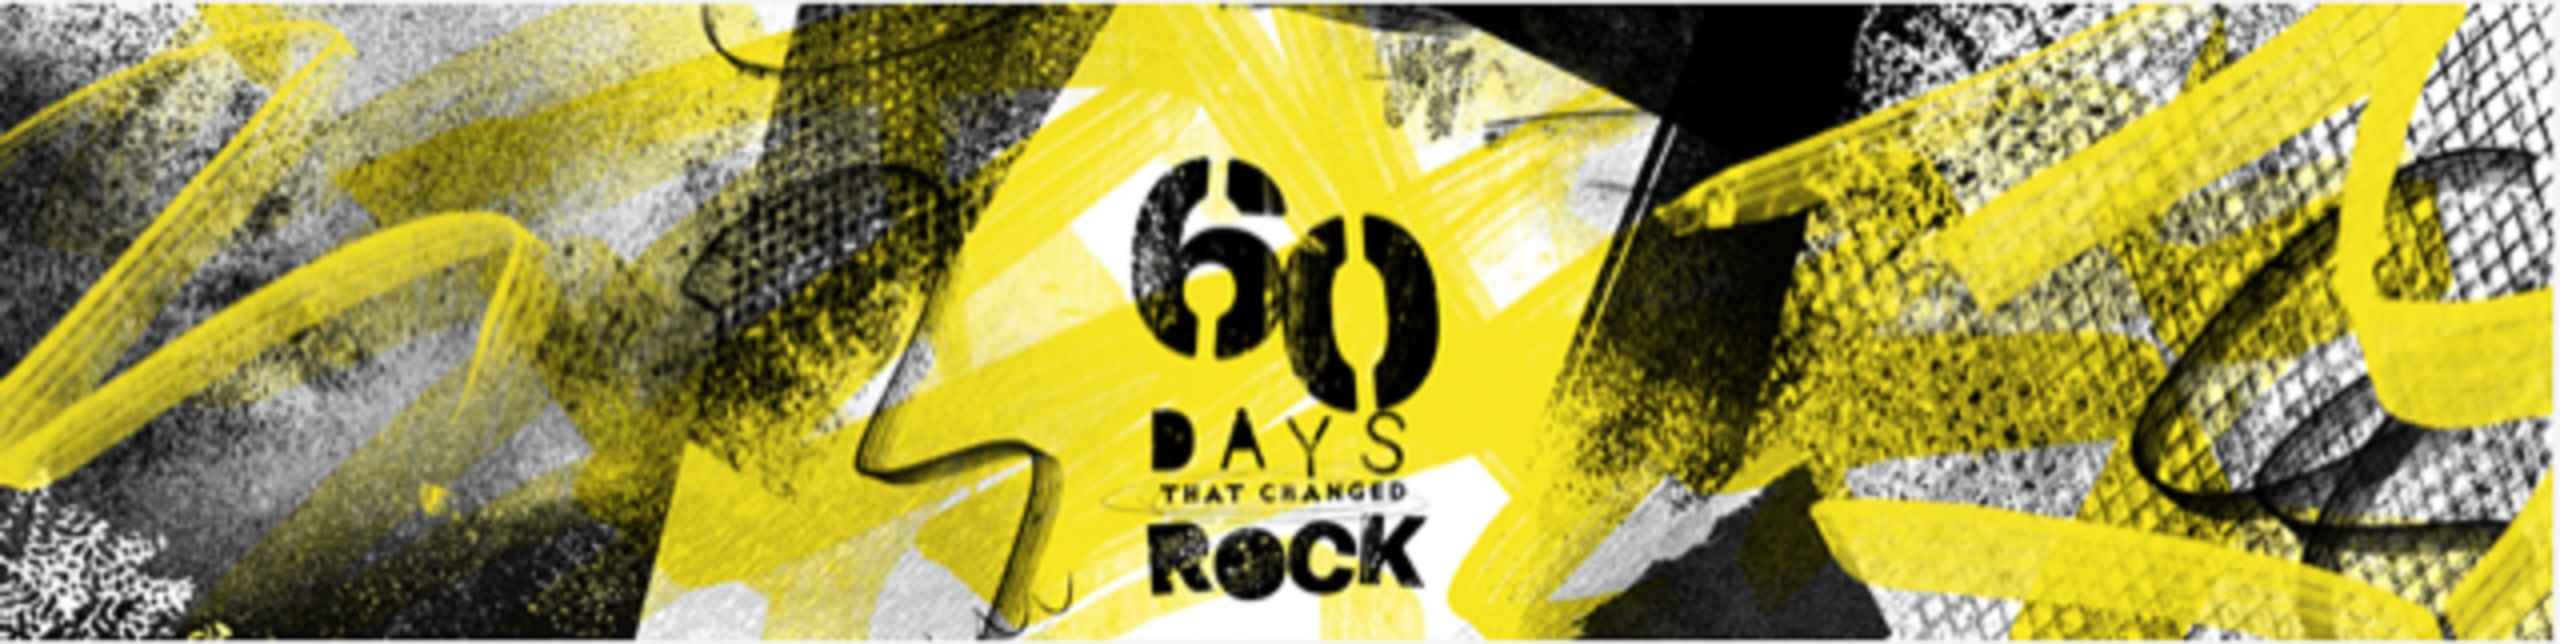 '60 Days That Changed Rock’ on Apple Music 